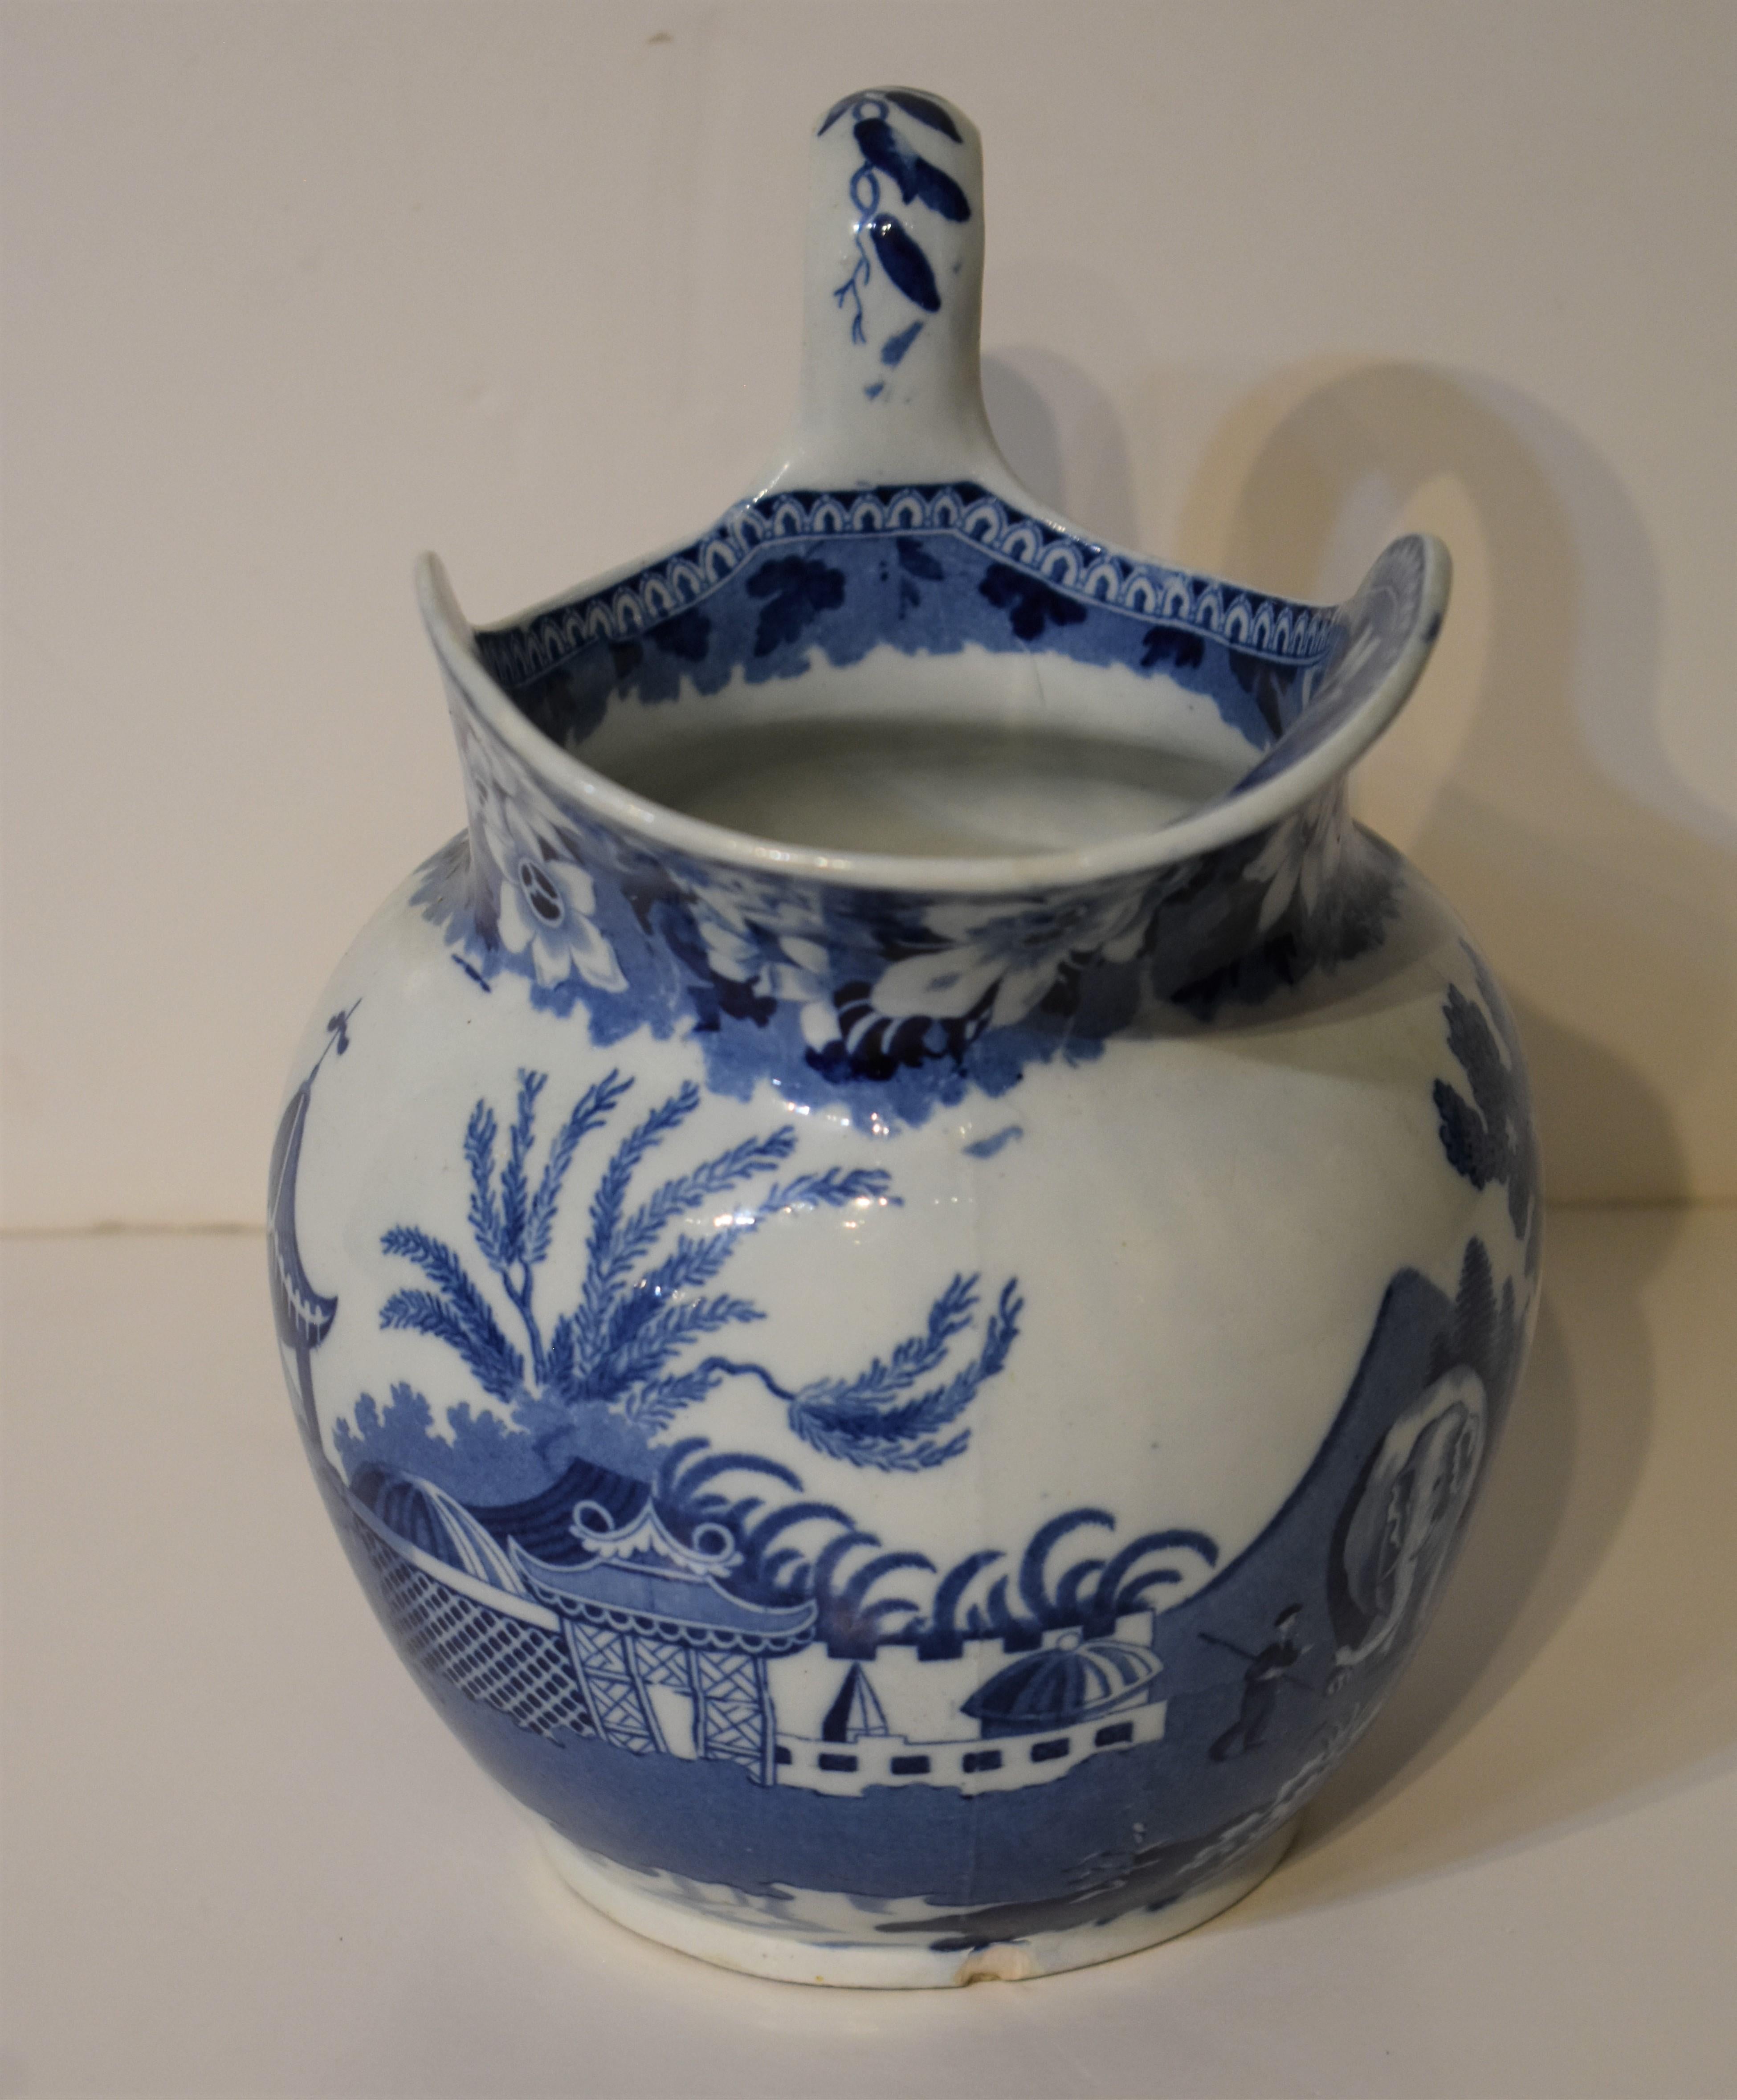 Blue and white staffordshire pitcher with chinoiserie design including exotic motifs. No makers mark,. No apparent restoration or damage